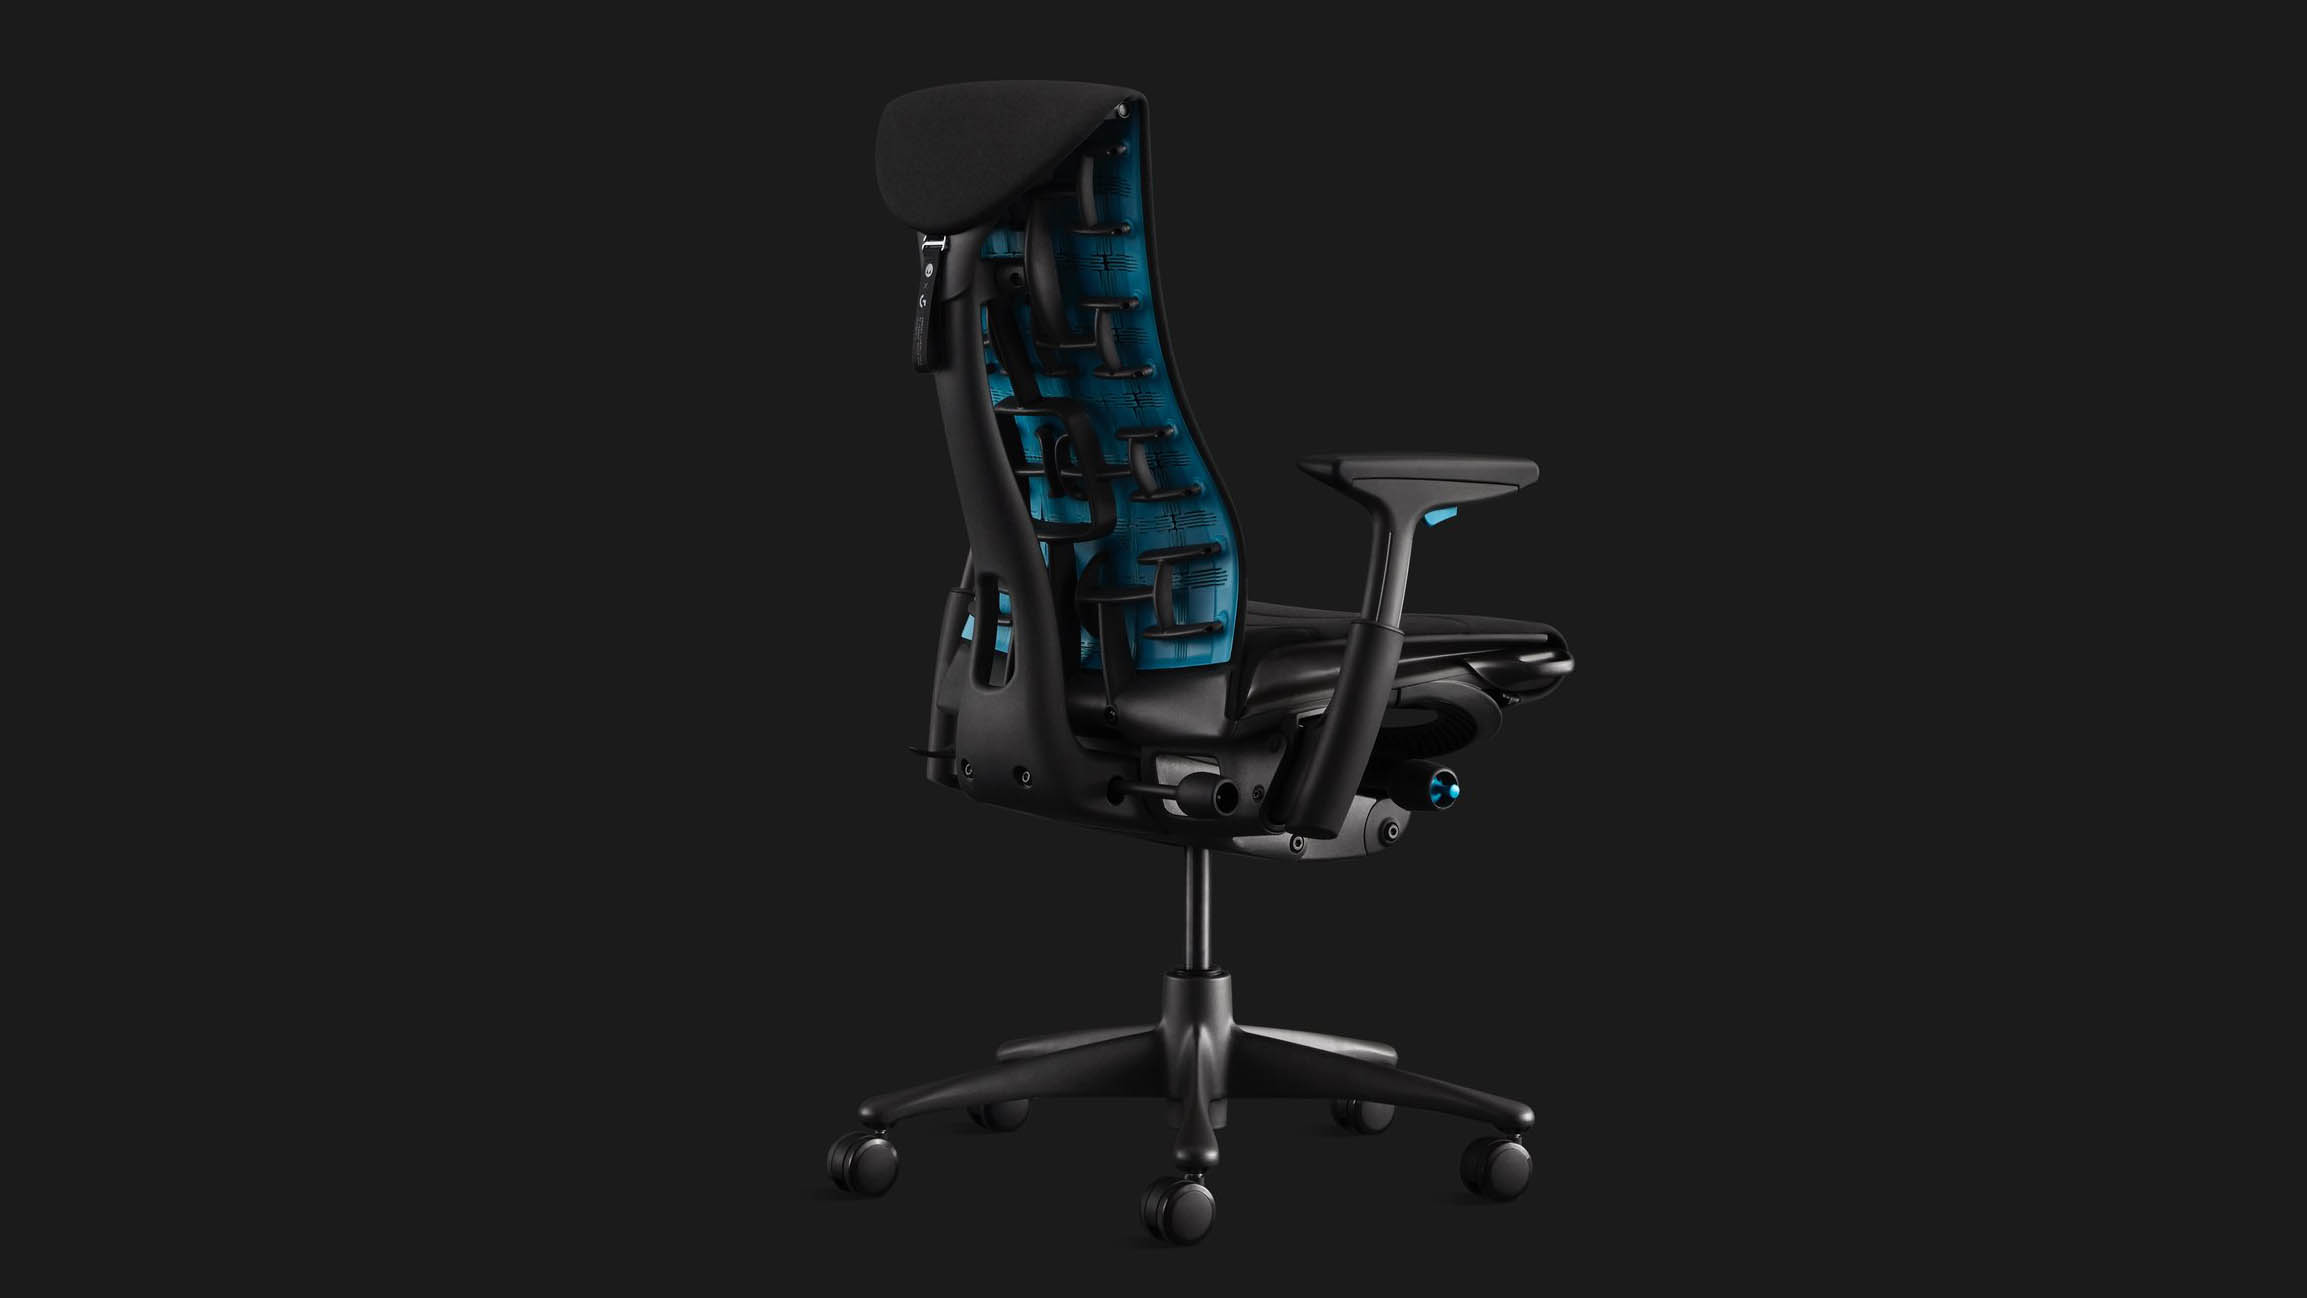 Logitech and Herman new chair will set you back | PC